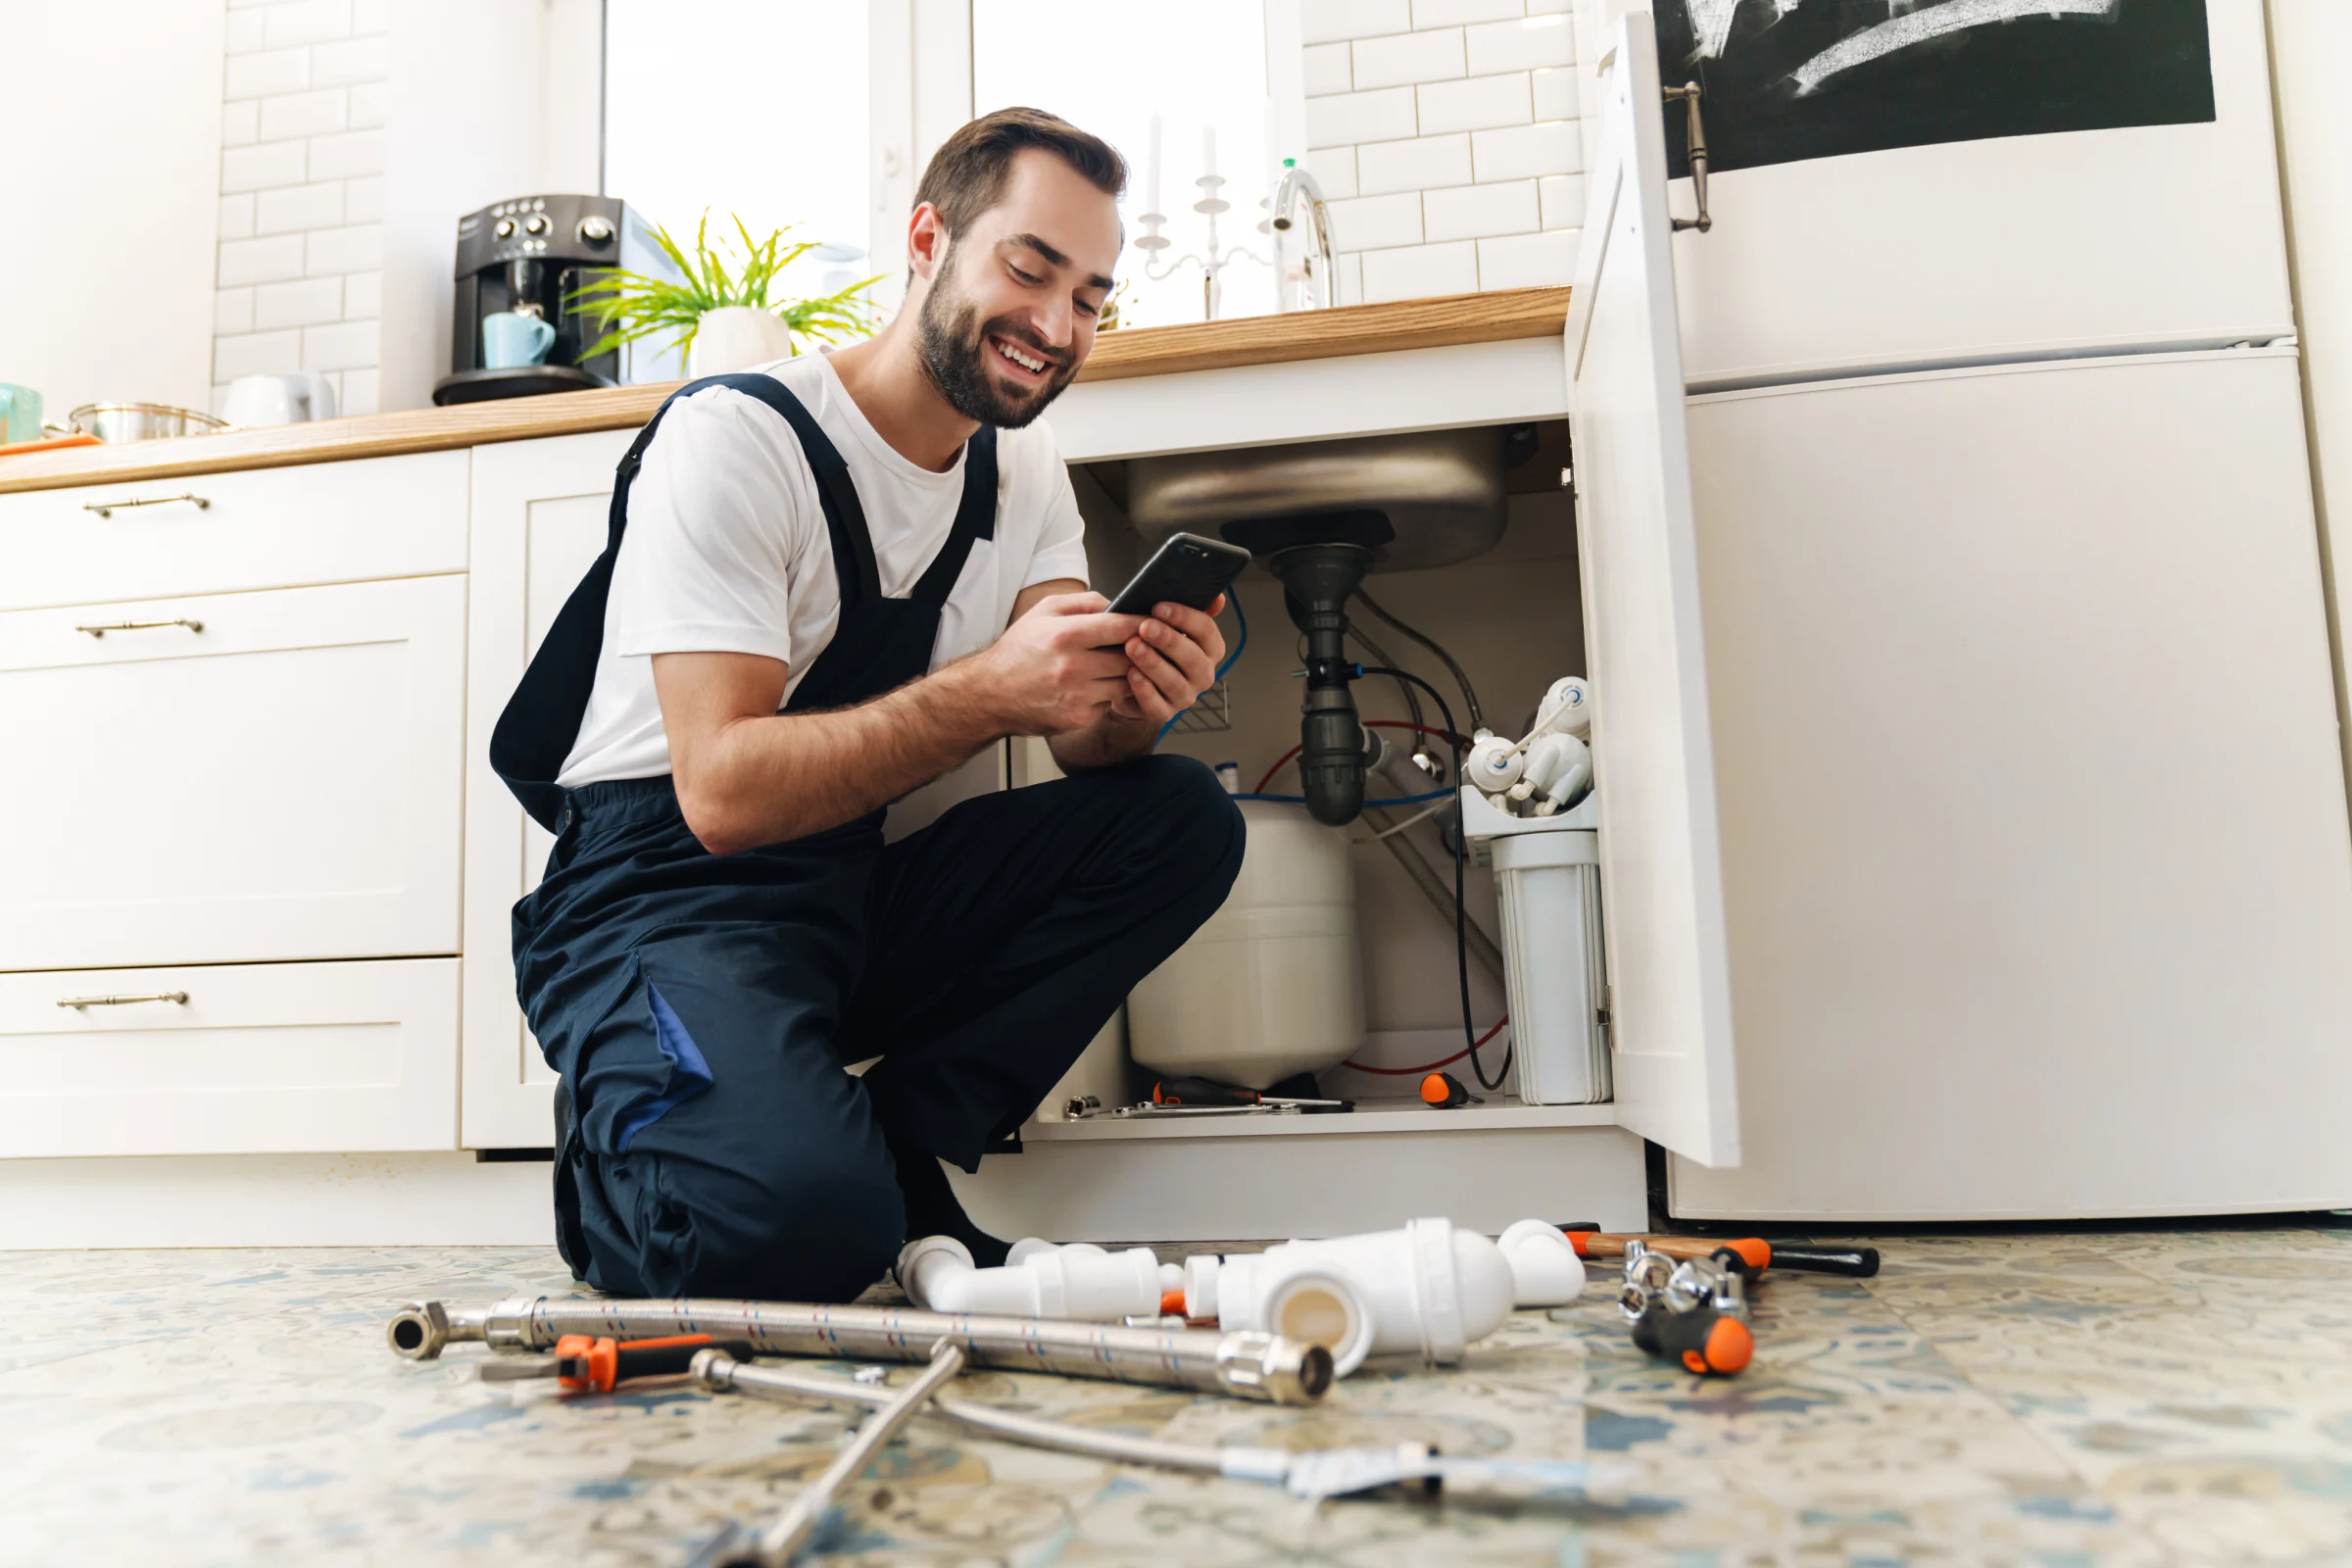 A lifestyle image of a plumber smiling while looking at his phone in front of a sink.